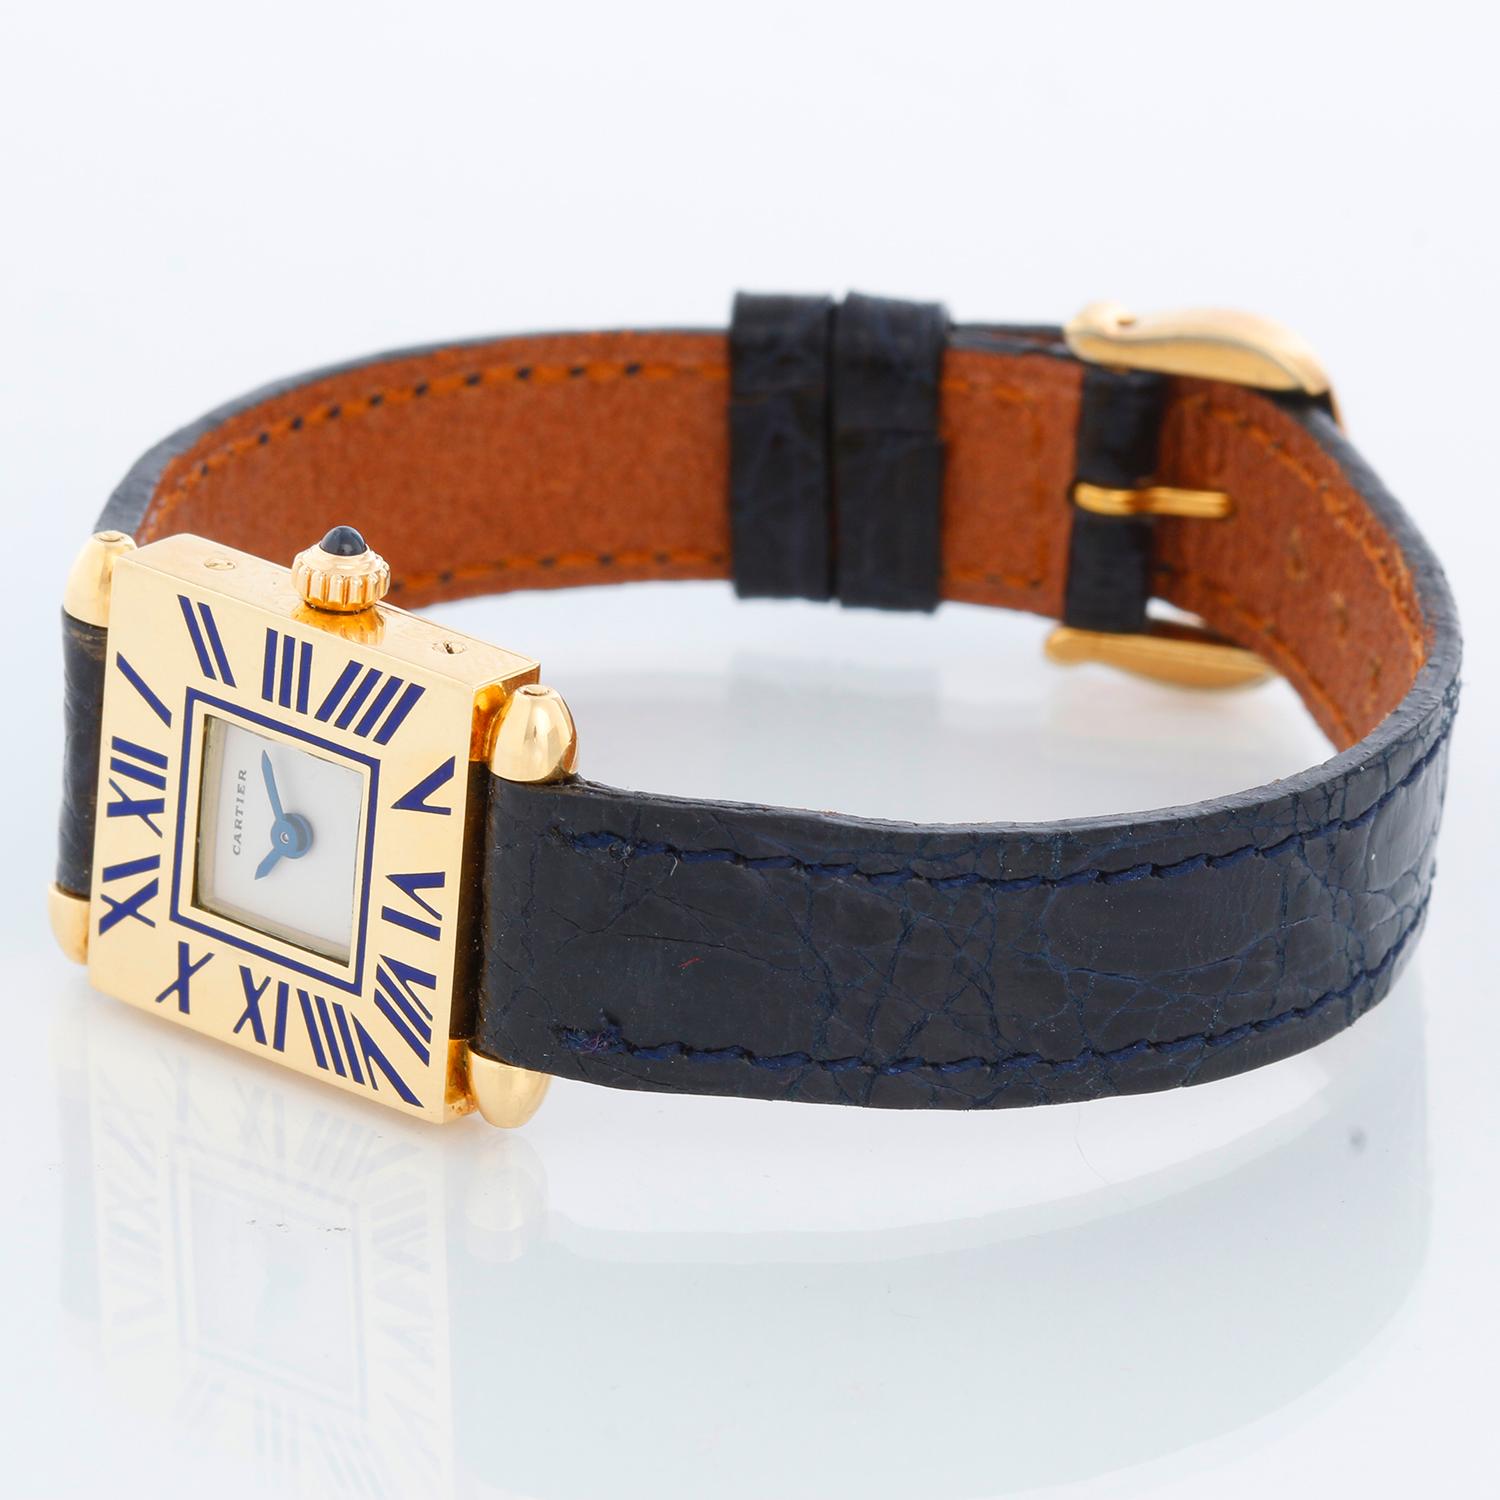 Cartier 18k Yellow Gold Quadrant Ladies Watch - Quartz. 18K Yellow gold ( 19 mm x 26mm ) grained blue Roman numerals. Ivory dial with blue hands. Black Cartier strap with Cartier tang buckle . Pre-owned with custom box.